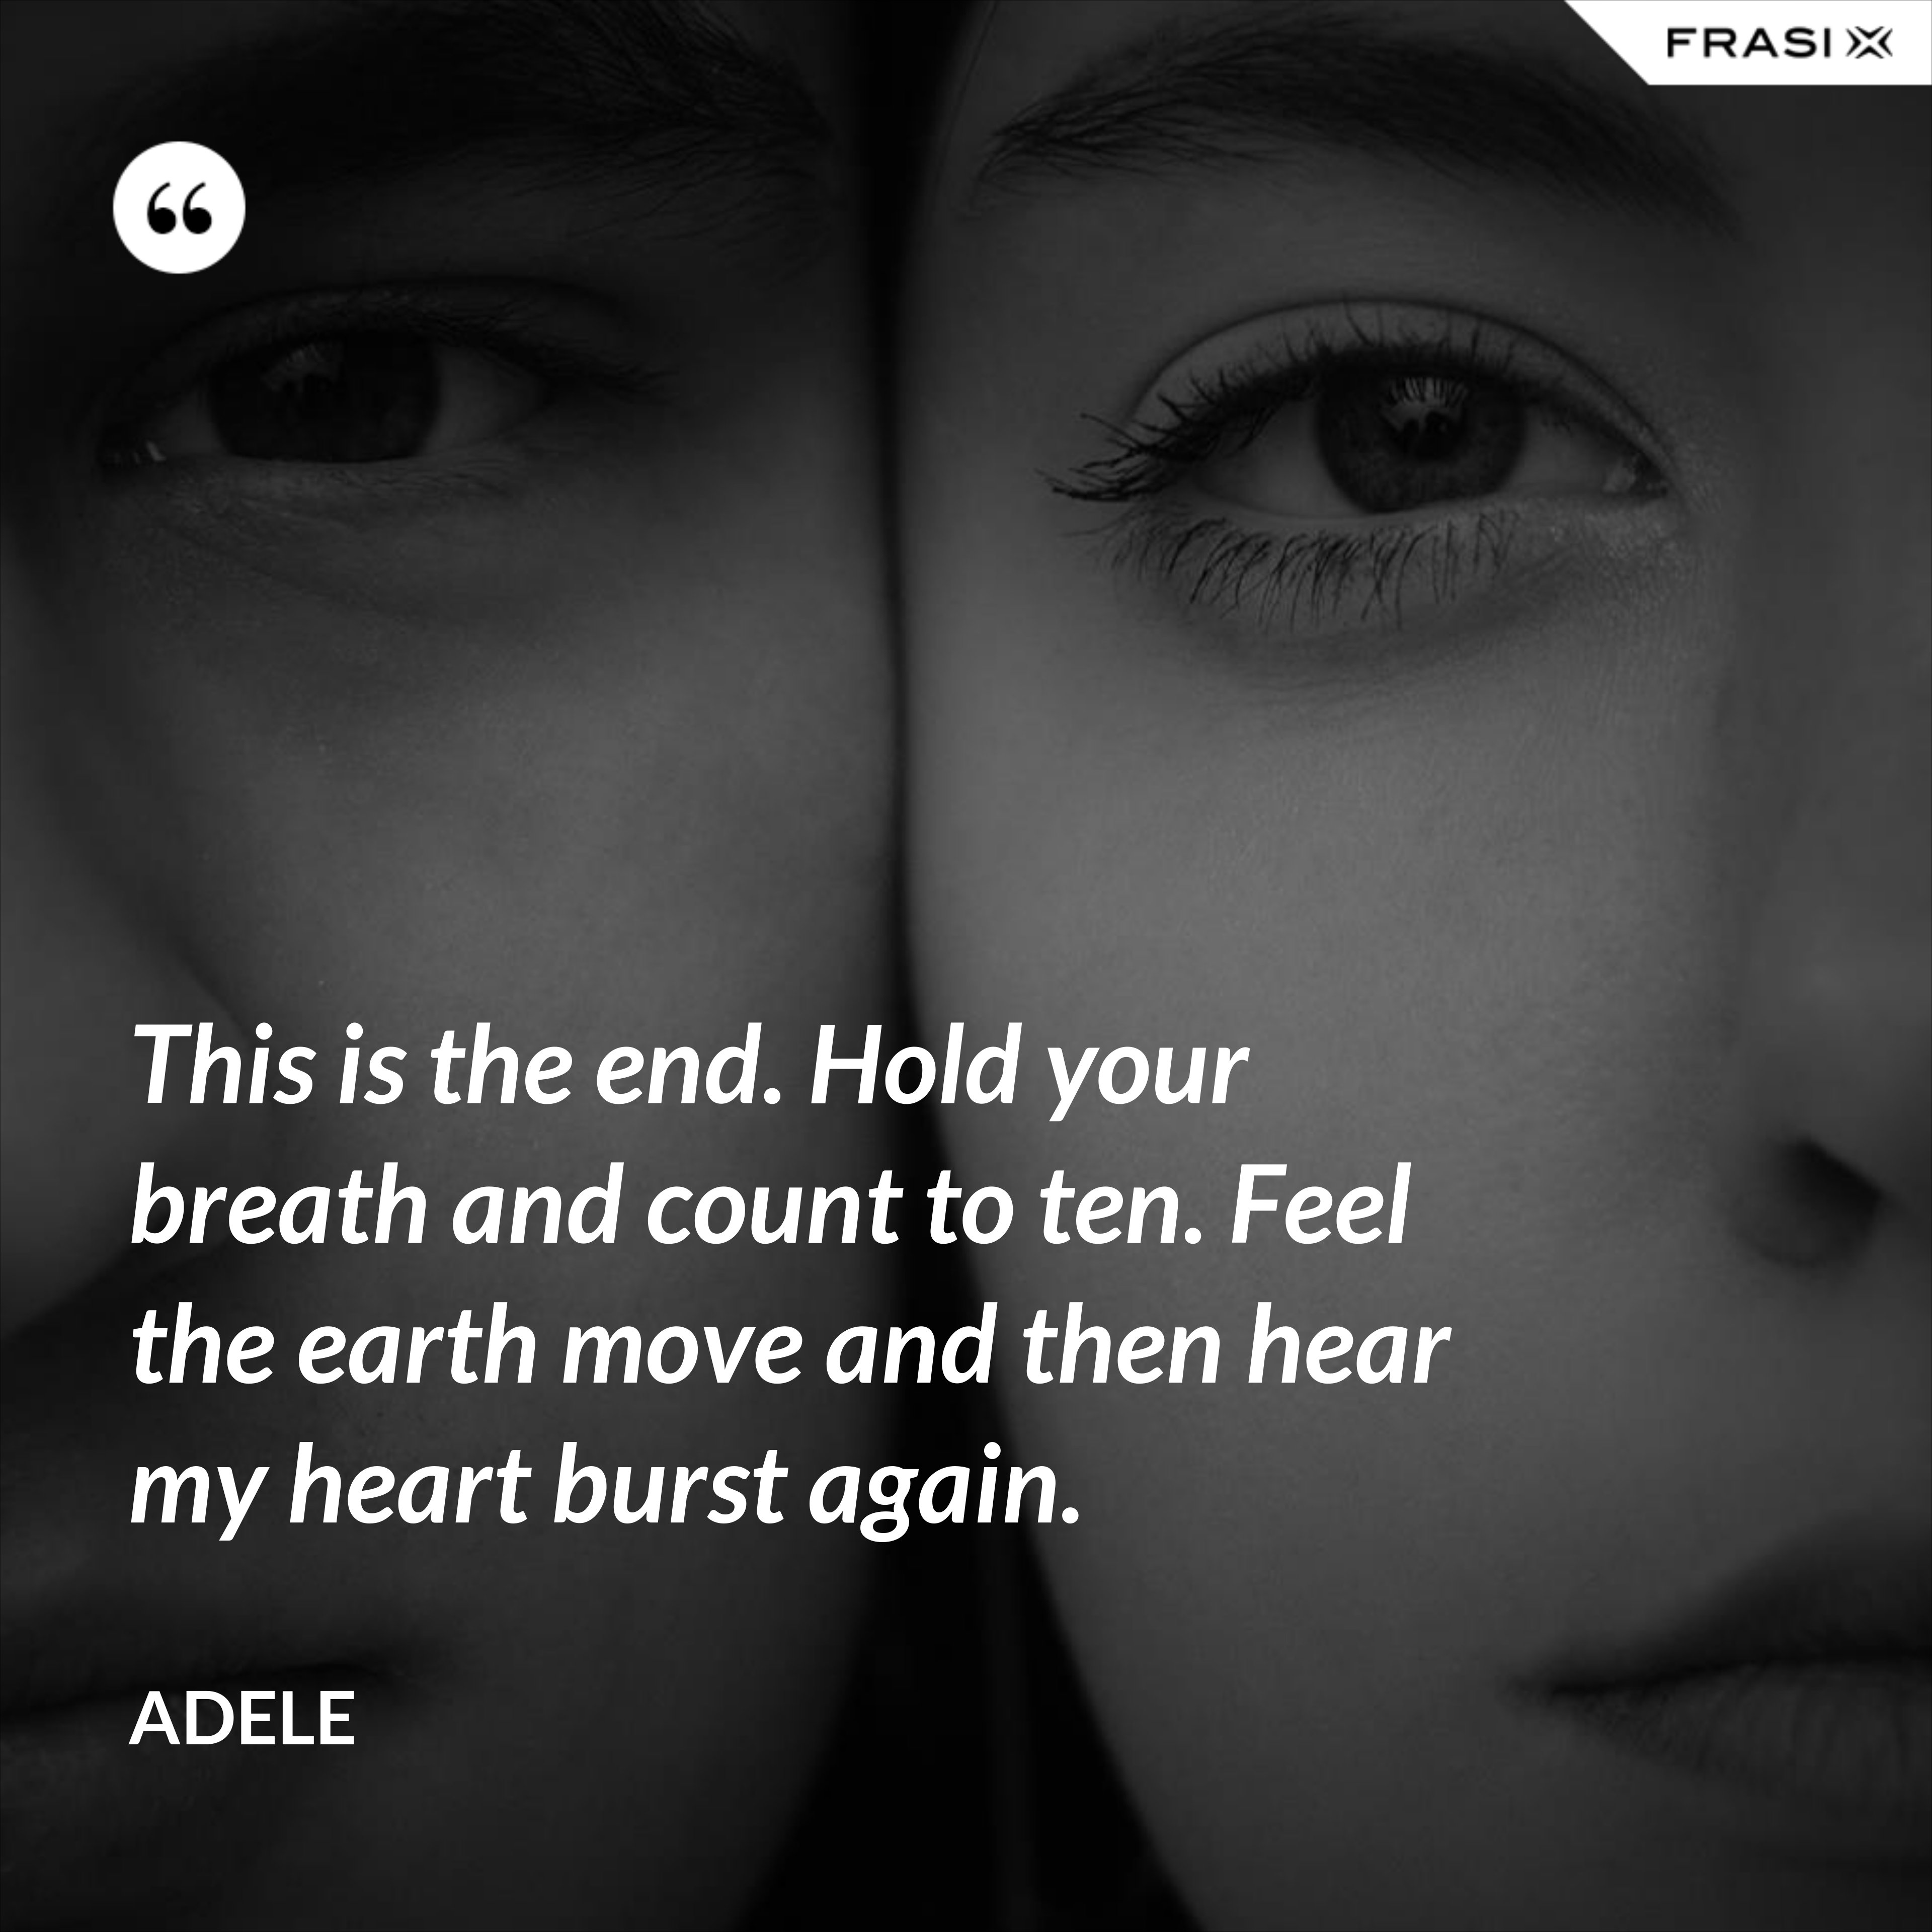 This is the end. Hold your breath and count to ten. Feel the earth move and then hear my heart burst again. - Adele